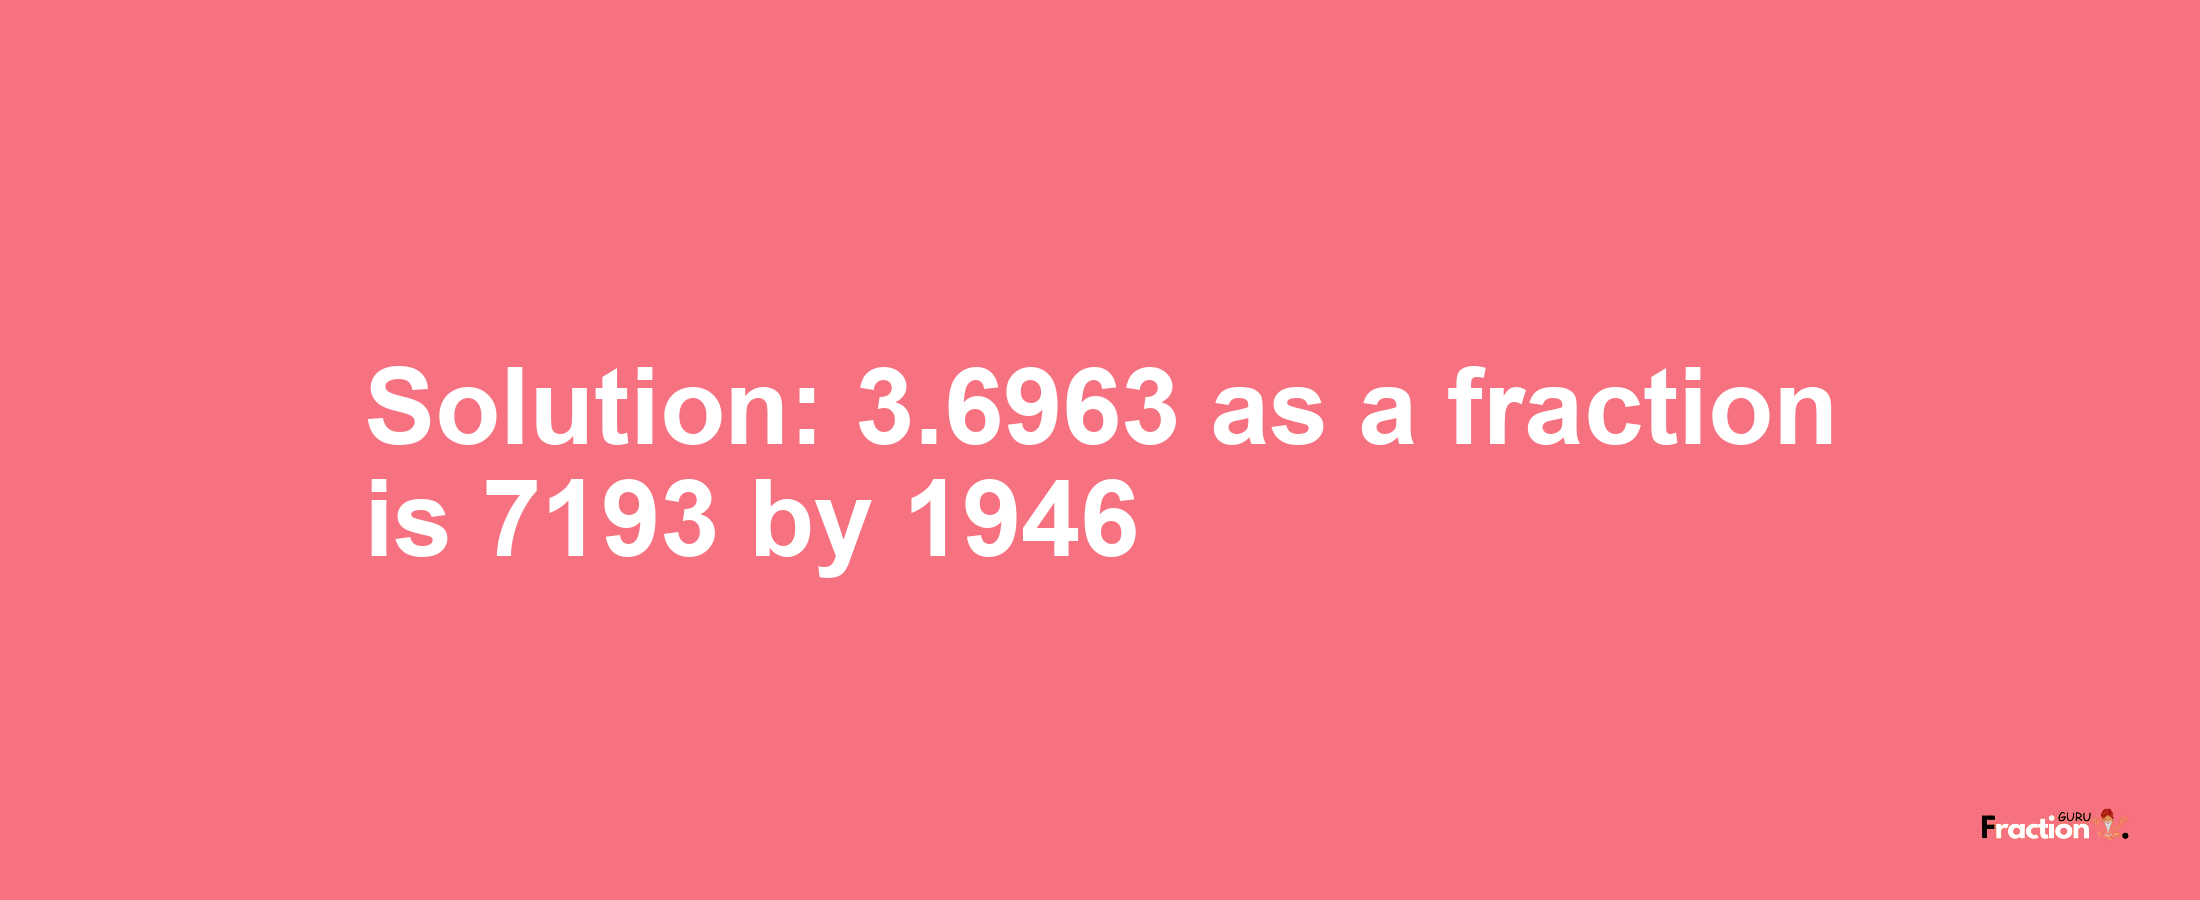 Solution:3.6963 as a fraction is 7193/1946